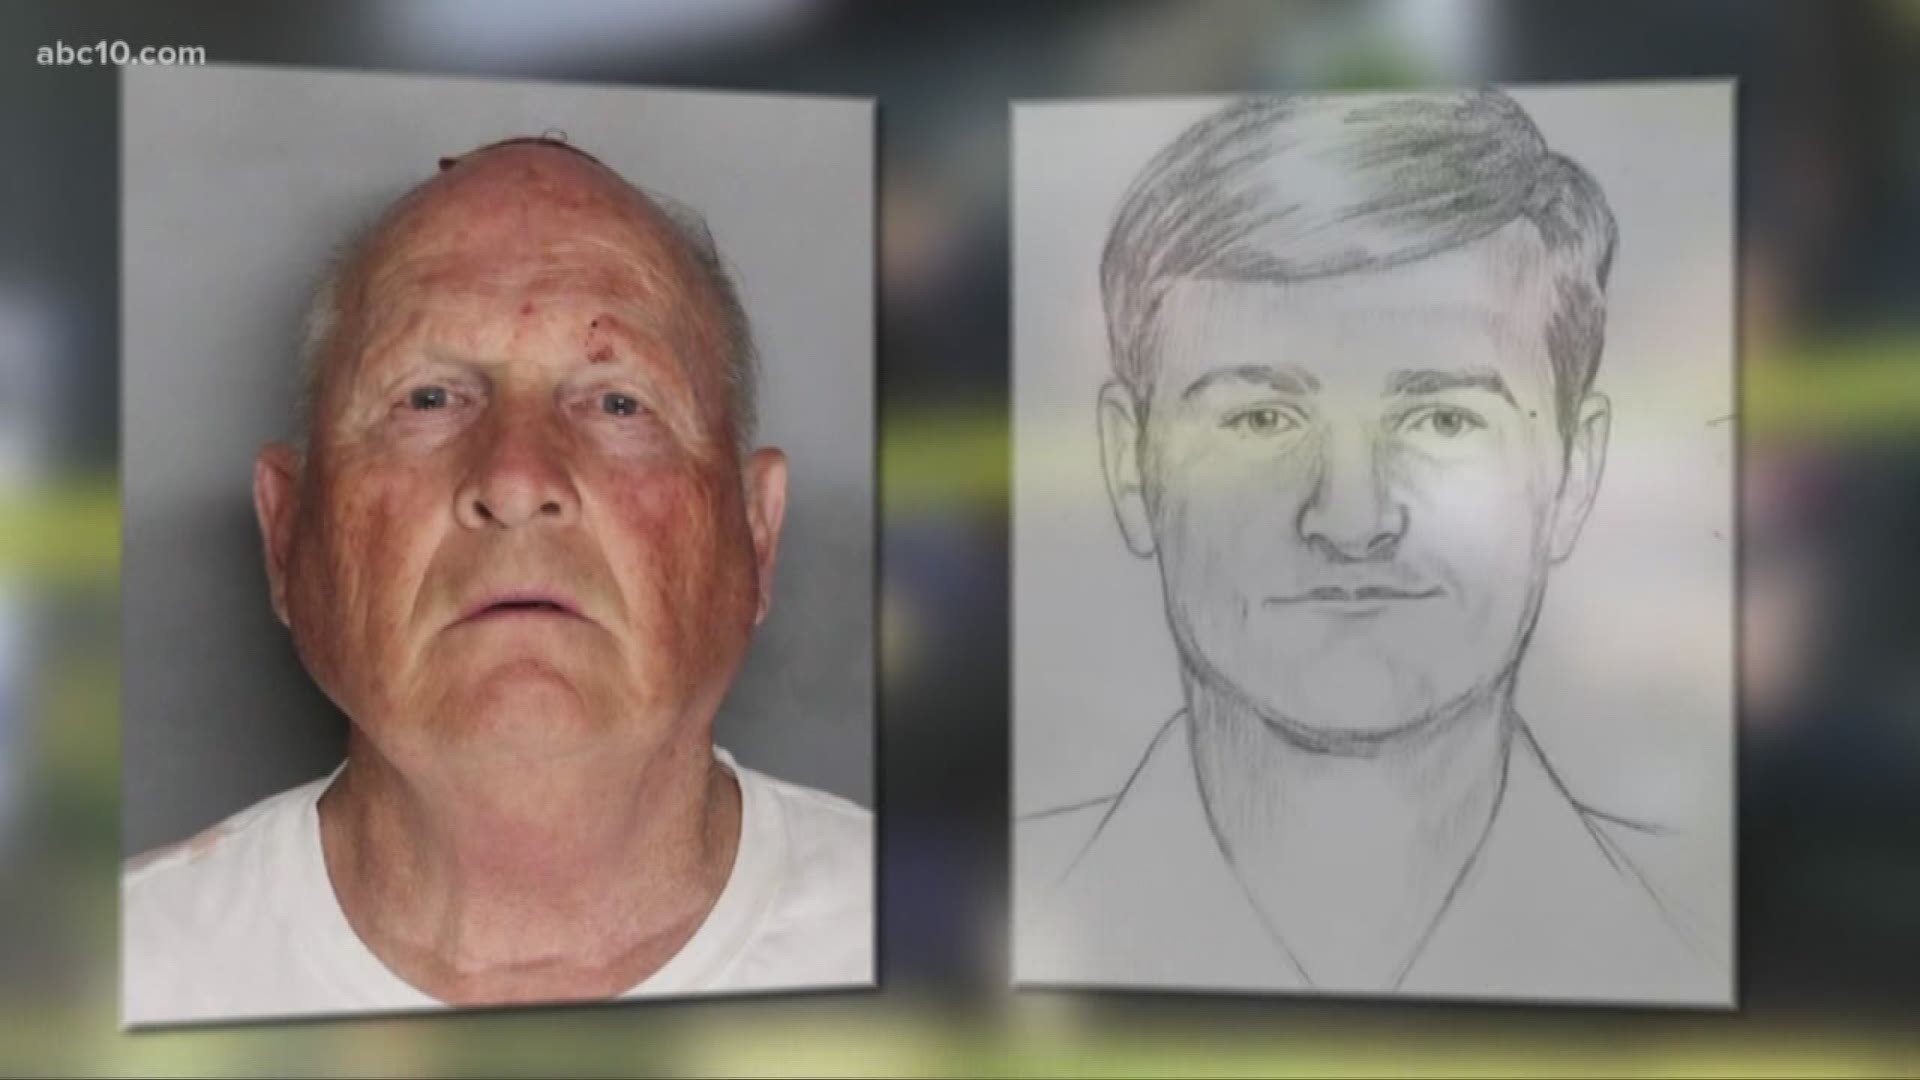 Joseph DeAngelo, also known as the East Area Rapist and Original Night Stalker, is expected to plead guilty Monday, June 29.